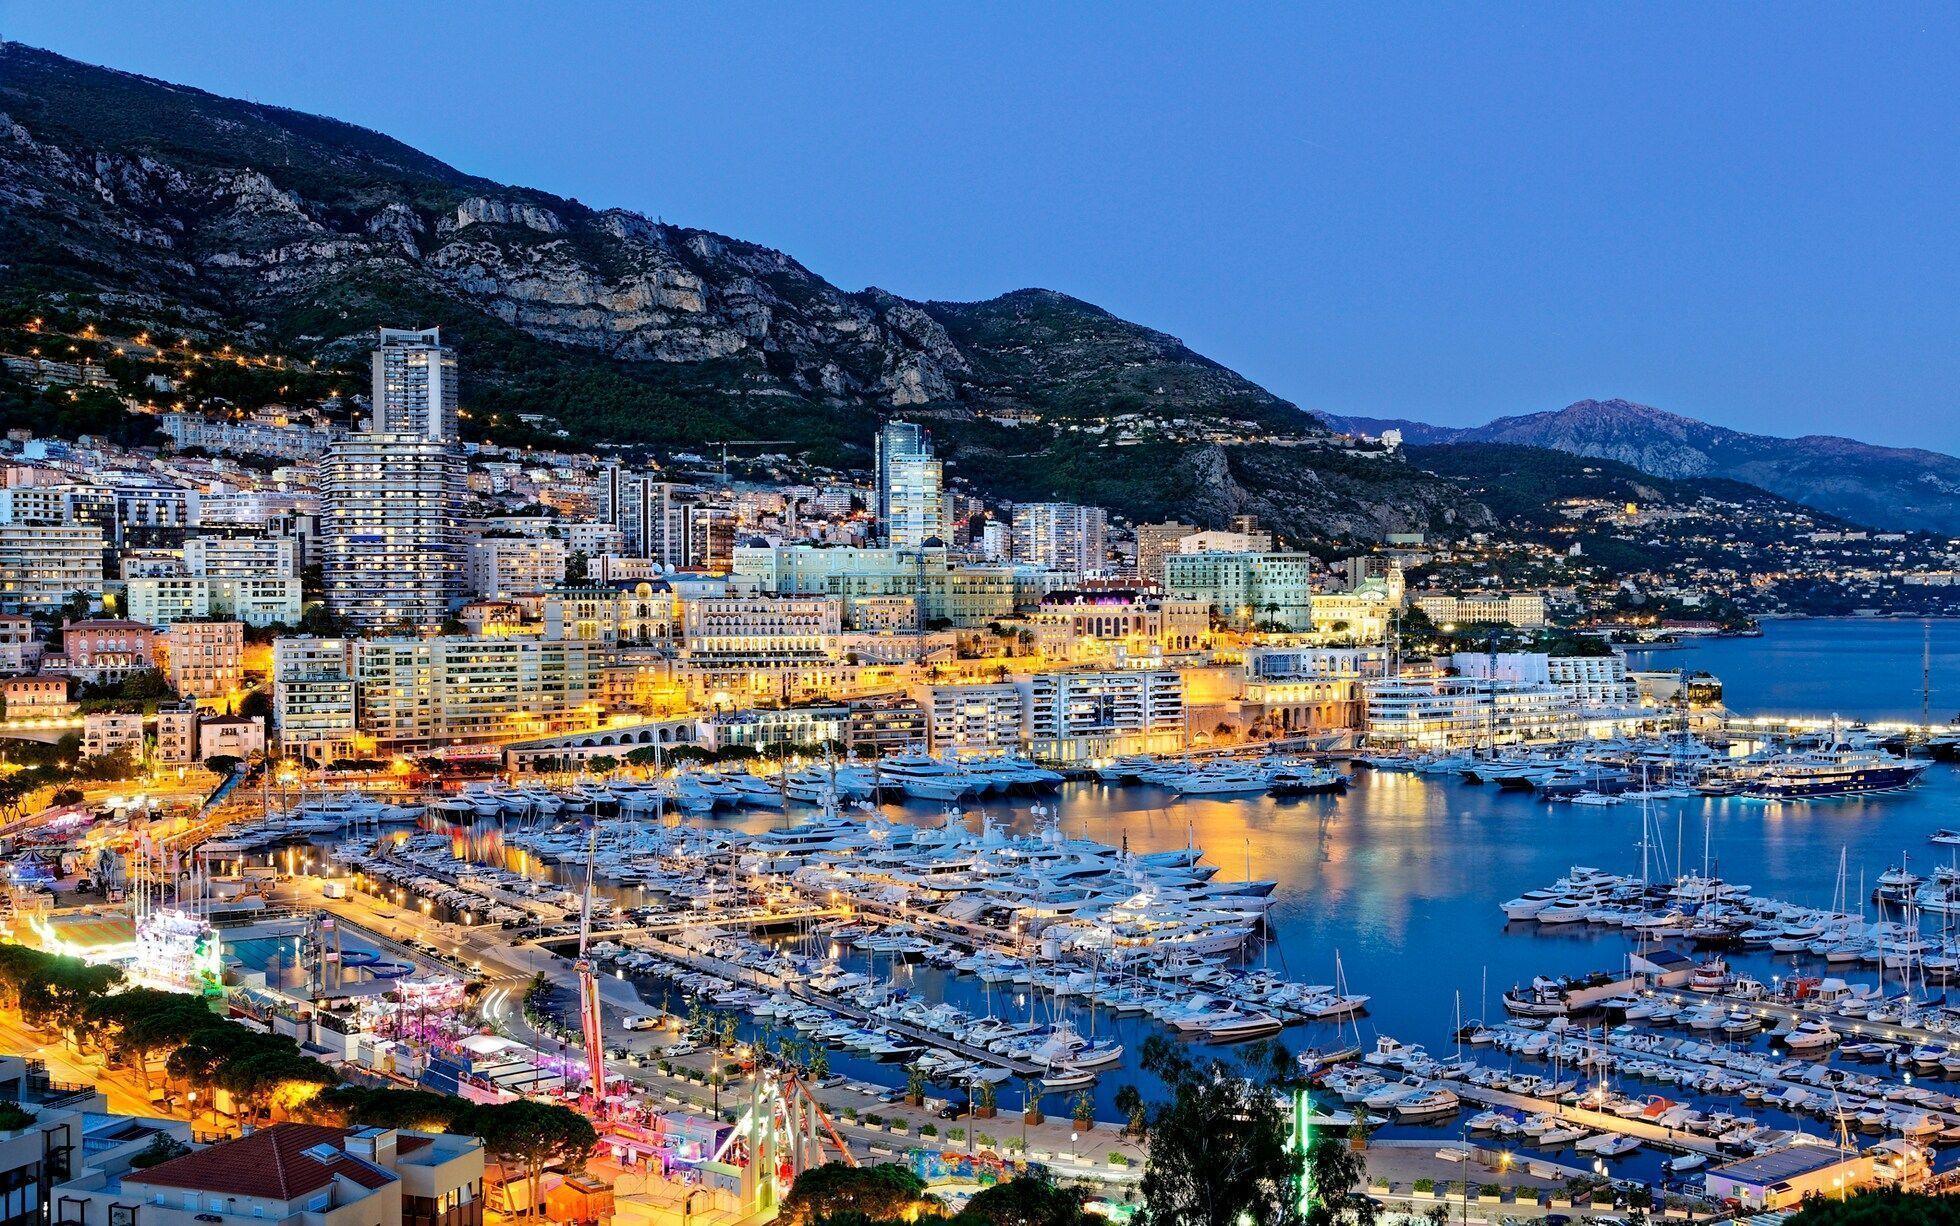 Looking for a good guy who wants to have fun in Monaco